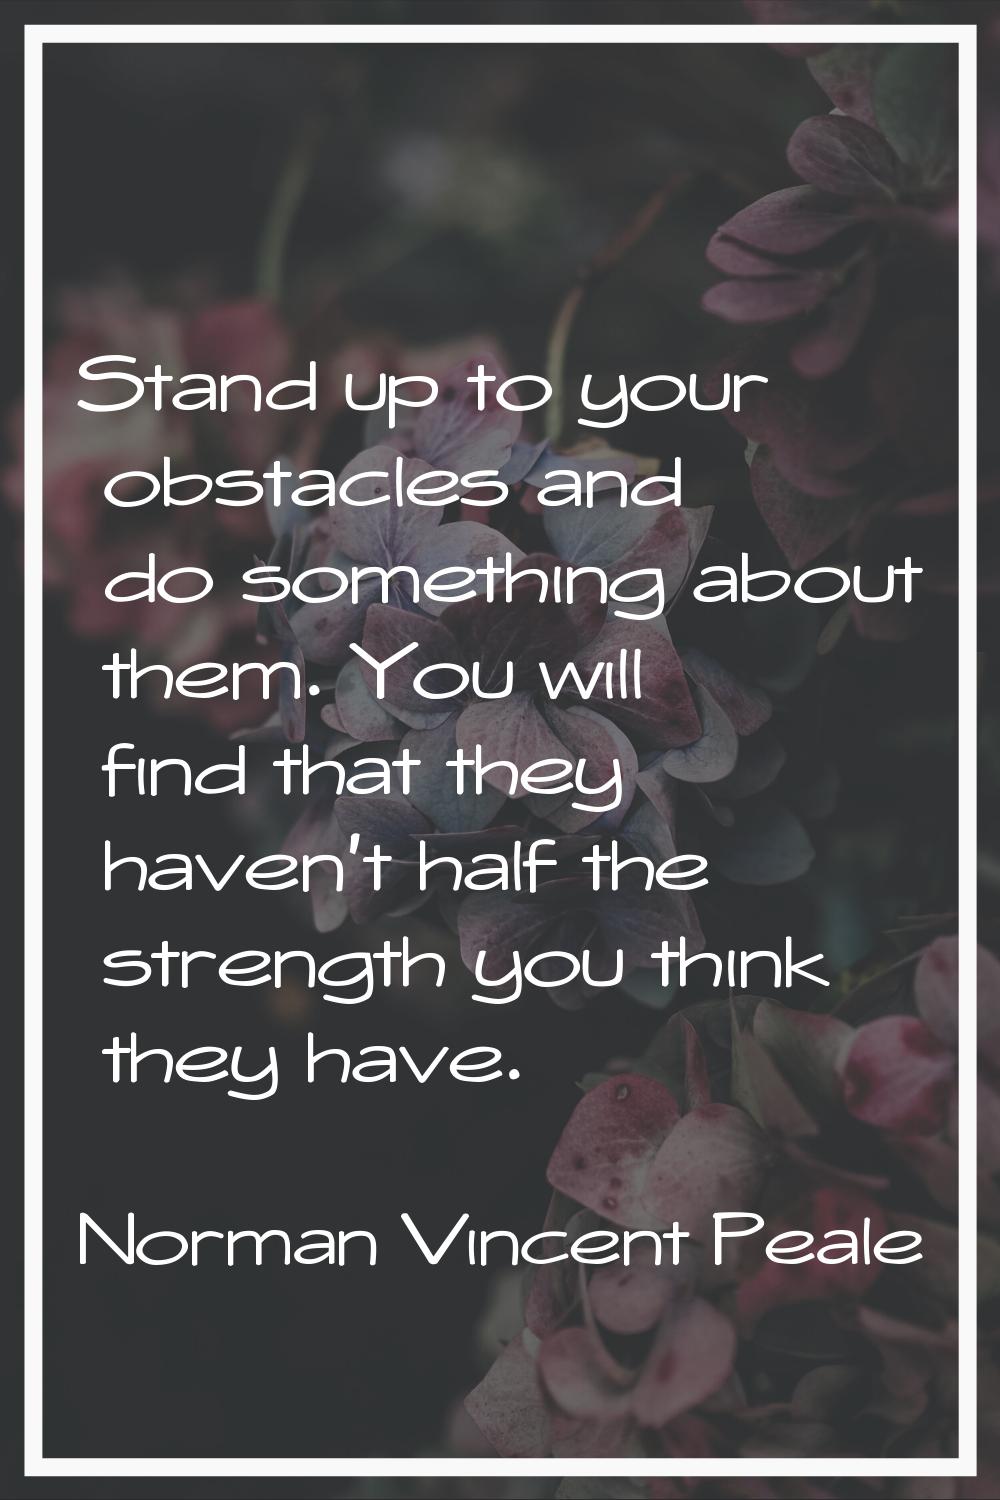 Stand up to your obstacles and do something about them. You will find that they haven't half the st